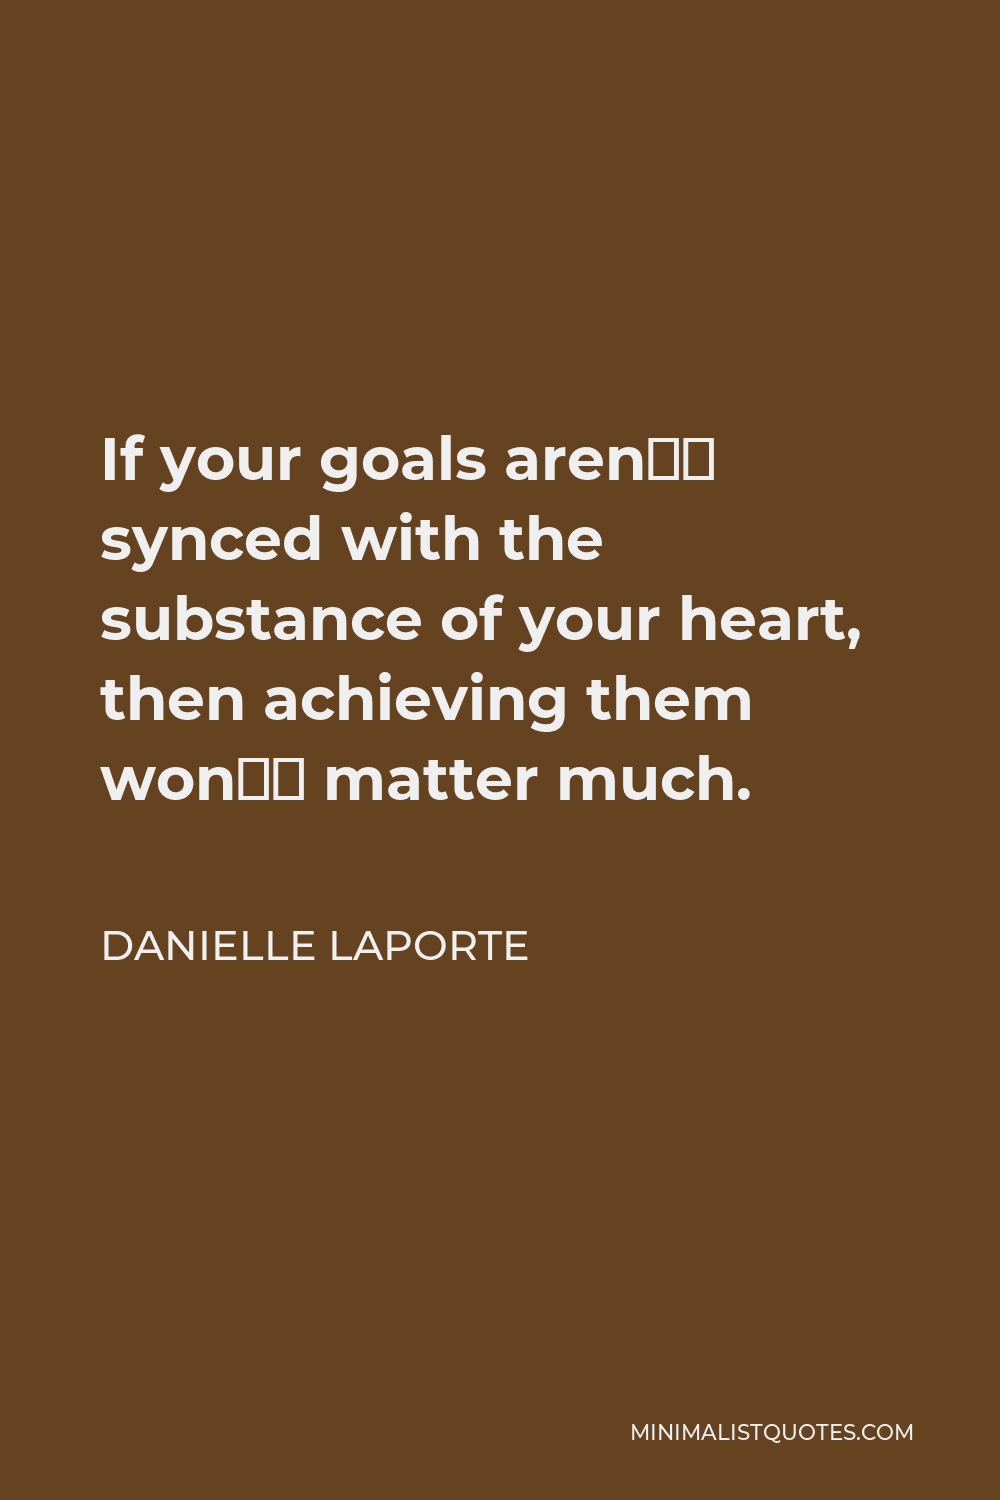 Danielle LaPorte Quote - If your goals aren’t synced with the substance of your heart, then achieving them won’t matter much.